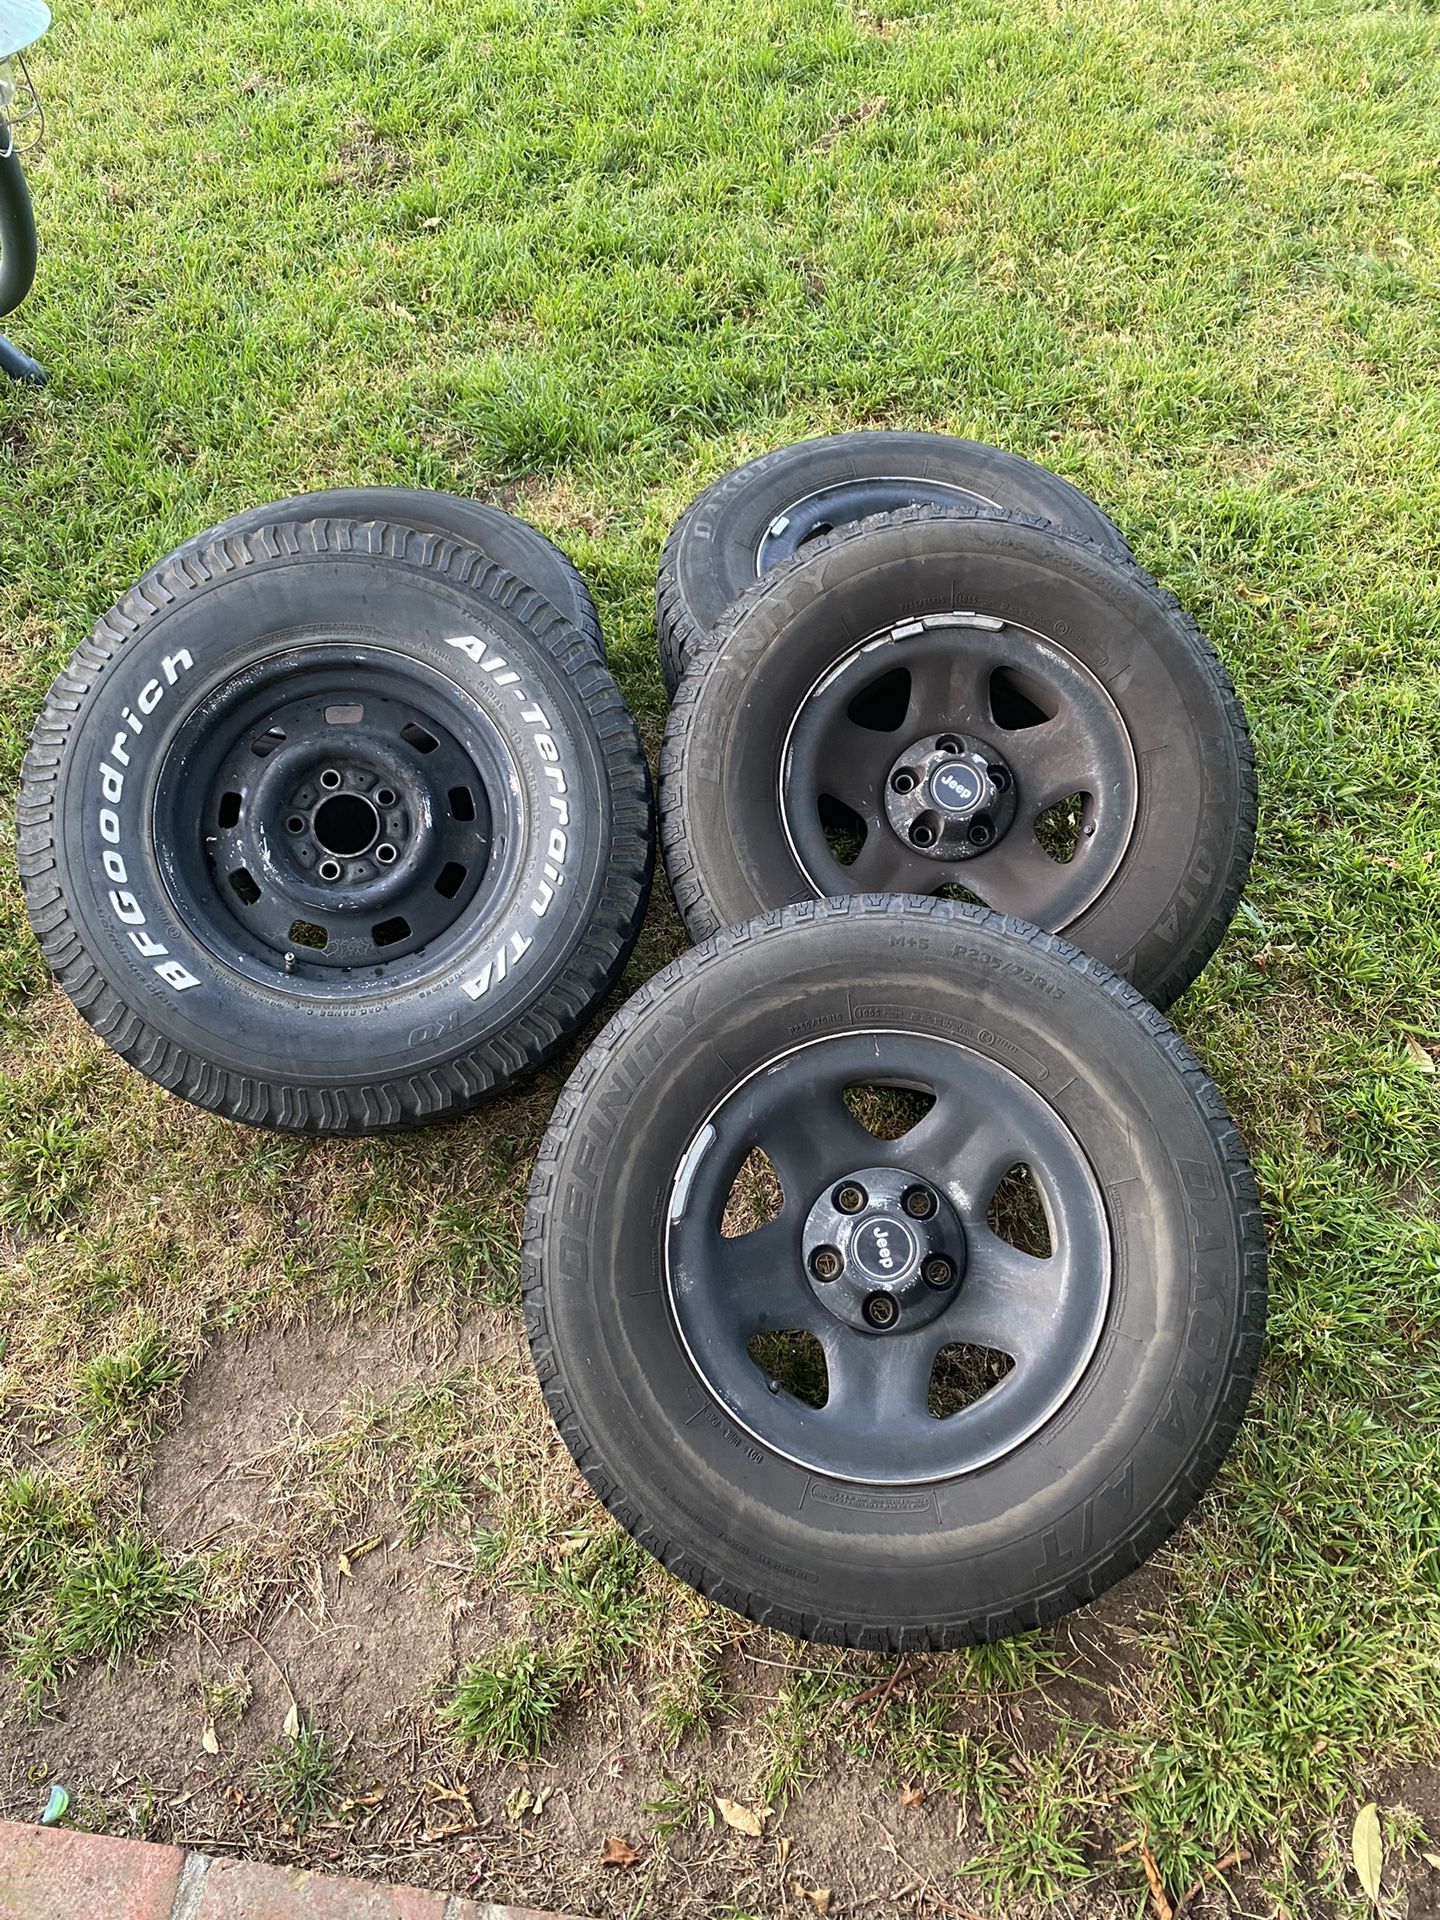 Jeep Tj 15in Wheels And Tires 4+spare